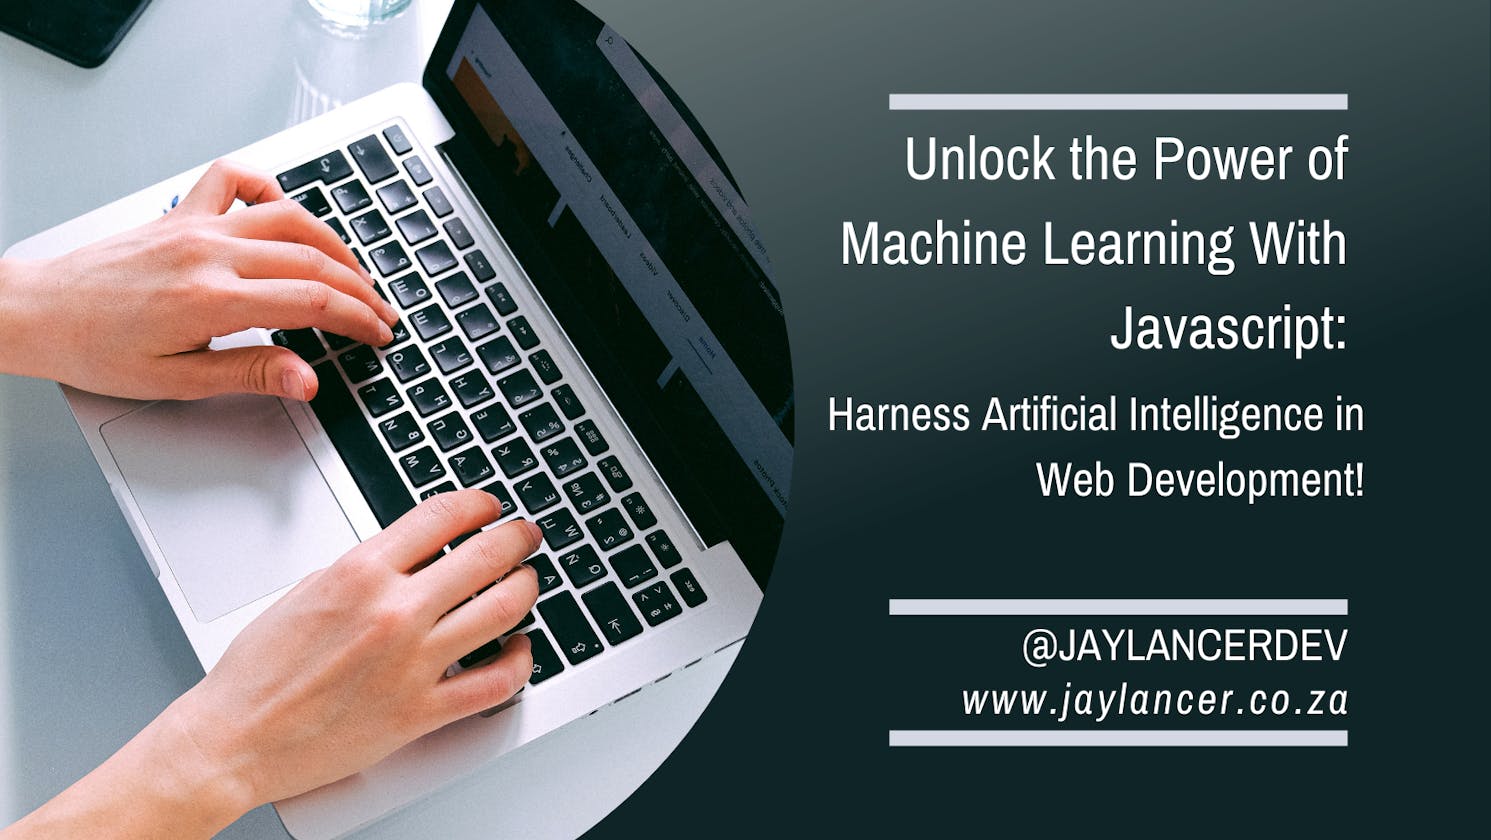 Unlock the Power of Machine Learning With Javascript: Harness Artificial Intelligence in Web Development!